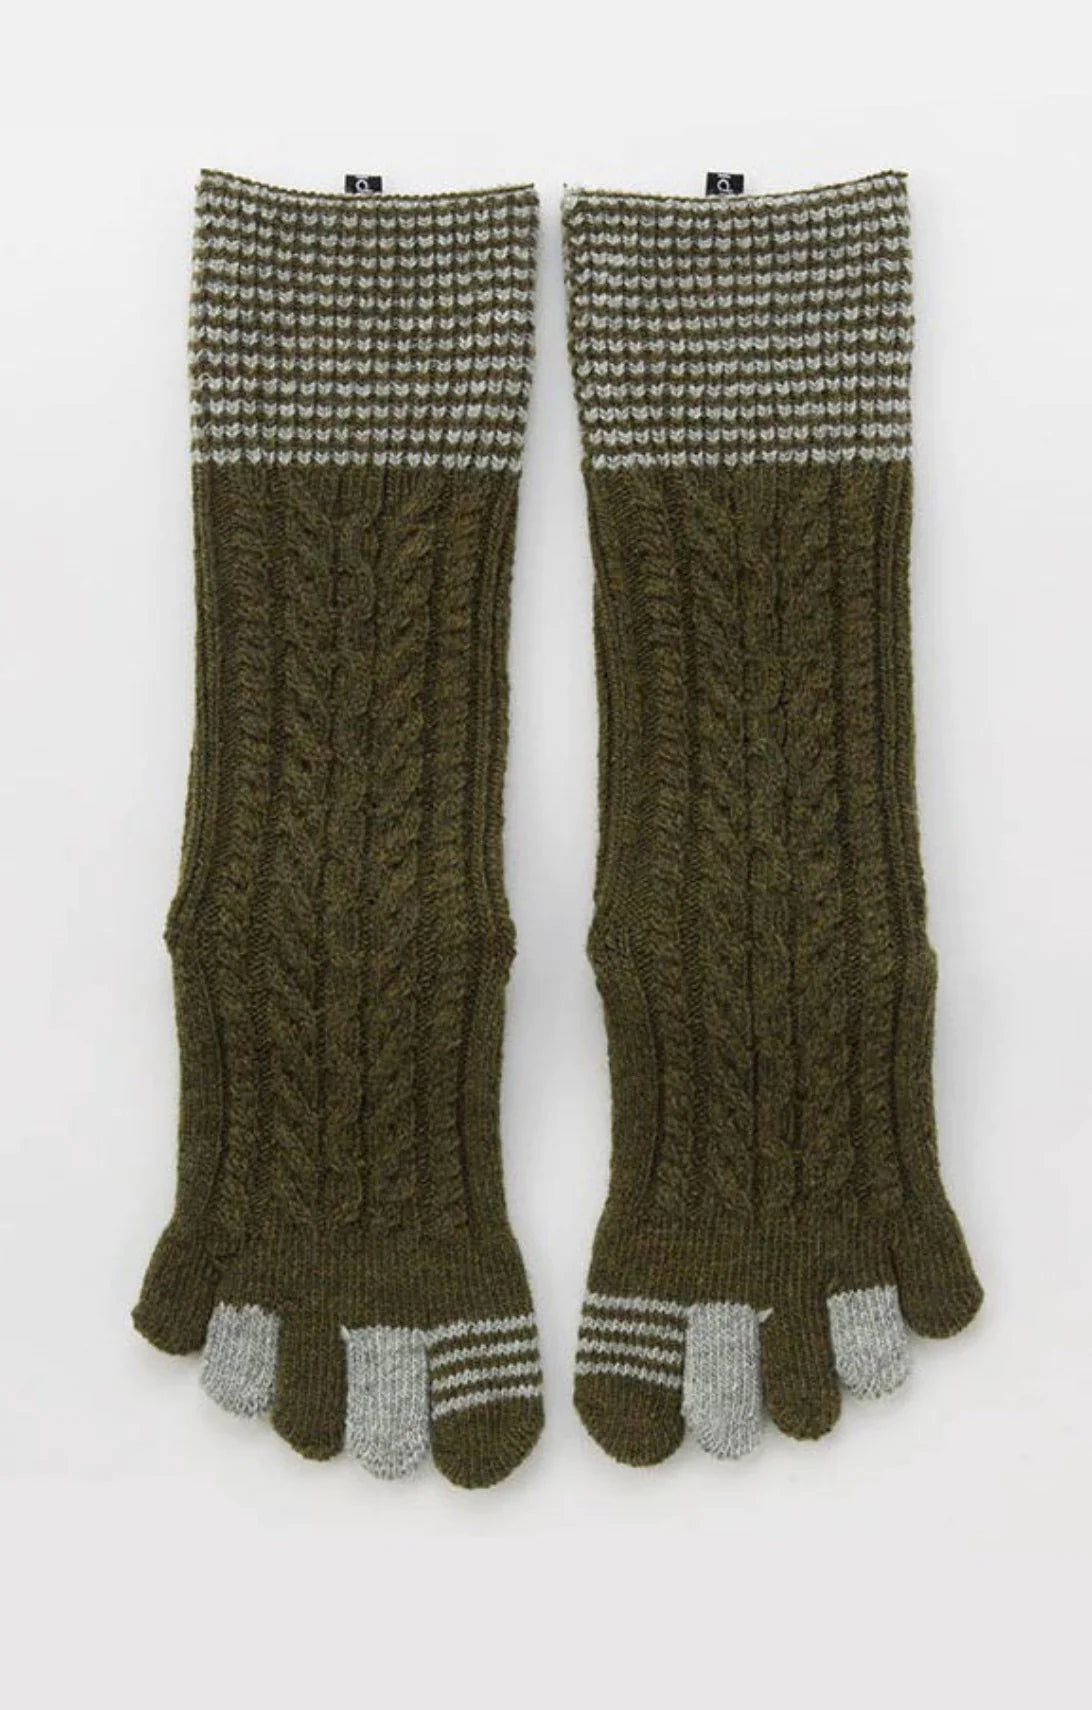 Frontal view of Knitido plus's Wool Blend Cable Striped Midcalf Toe Socks in Olive color